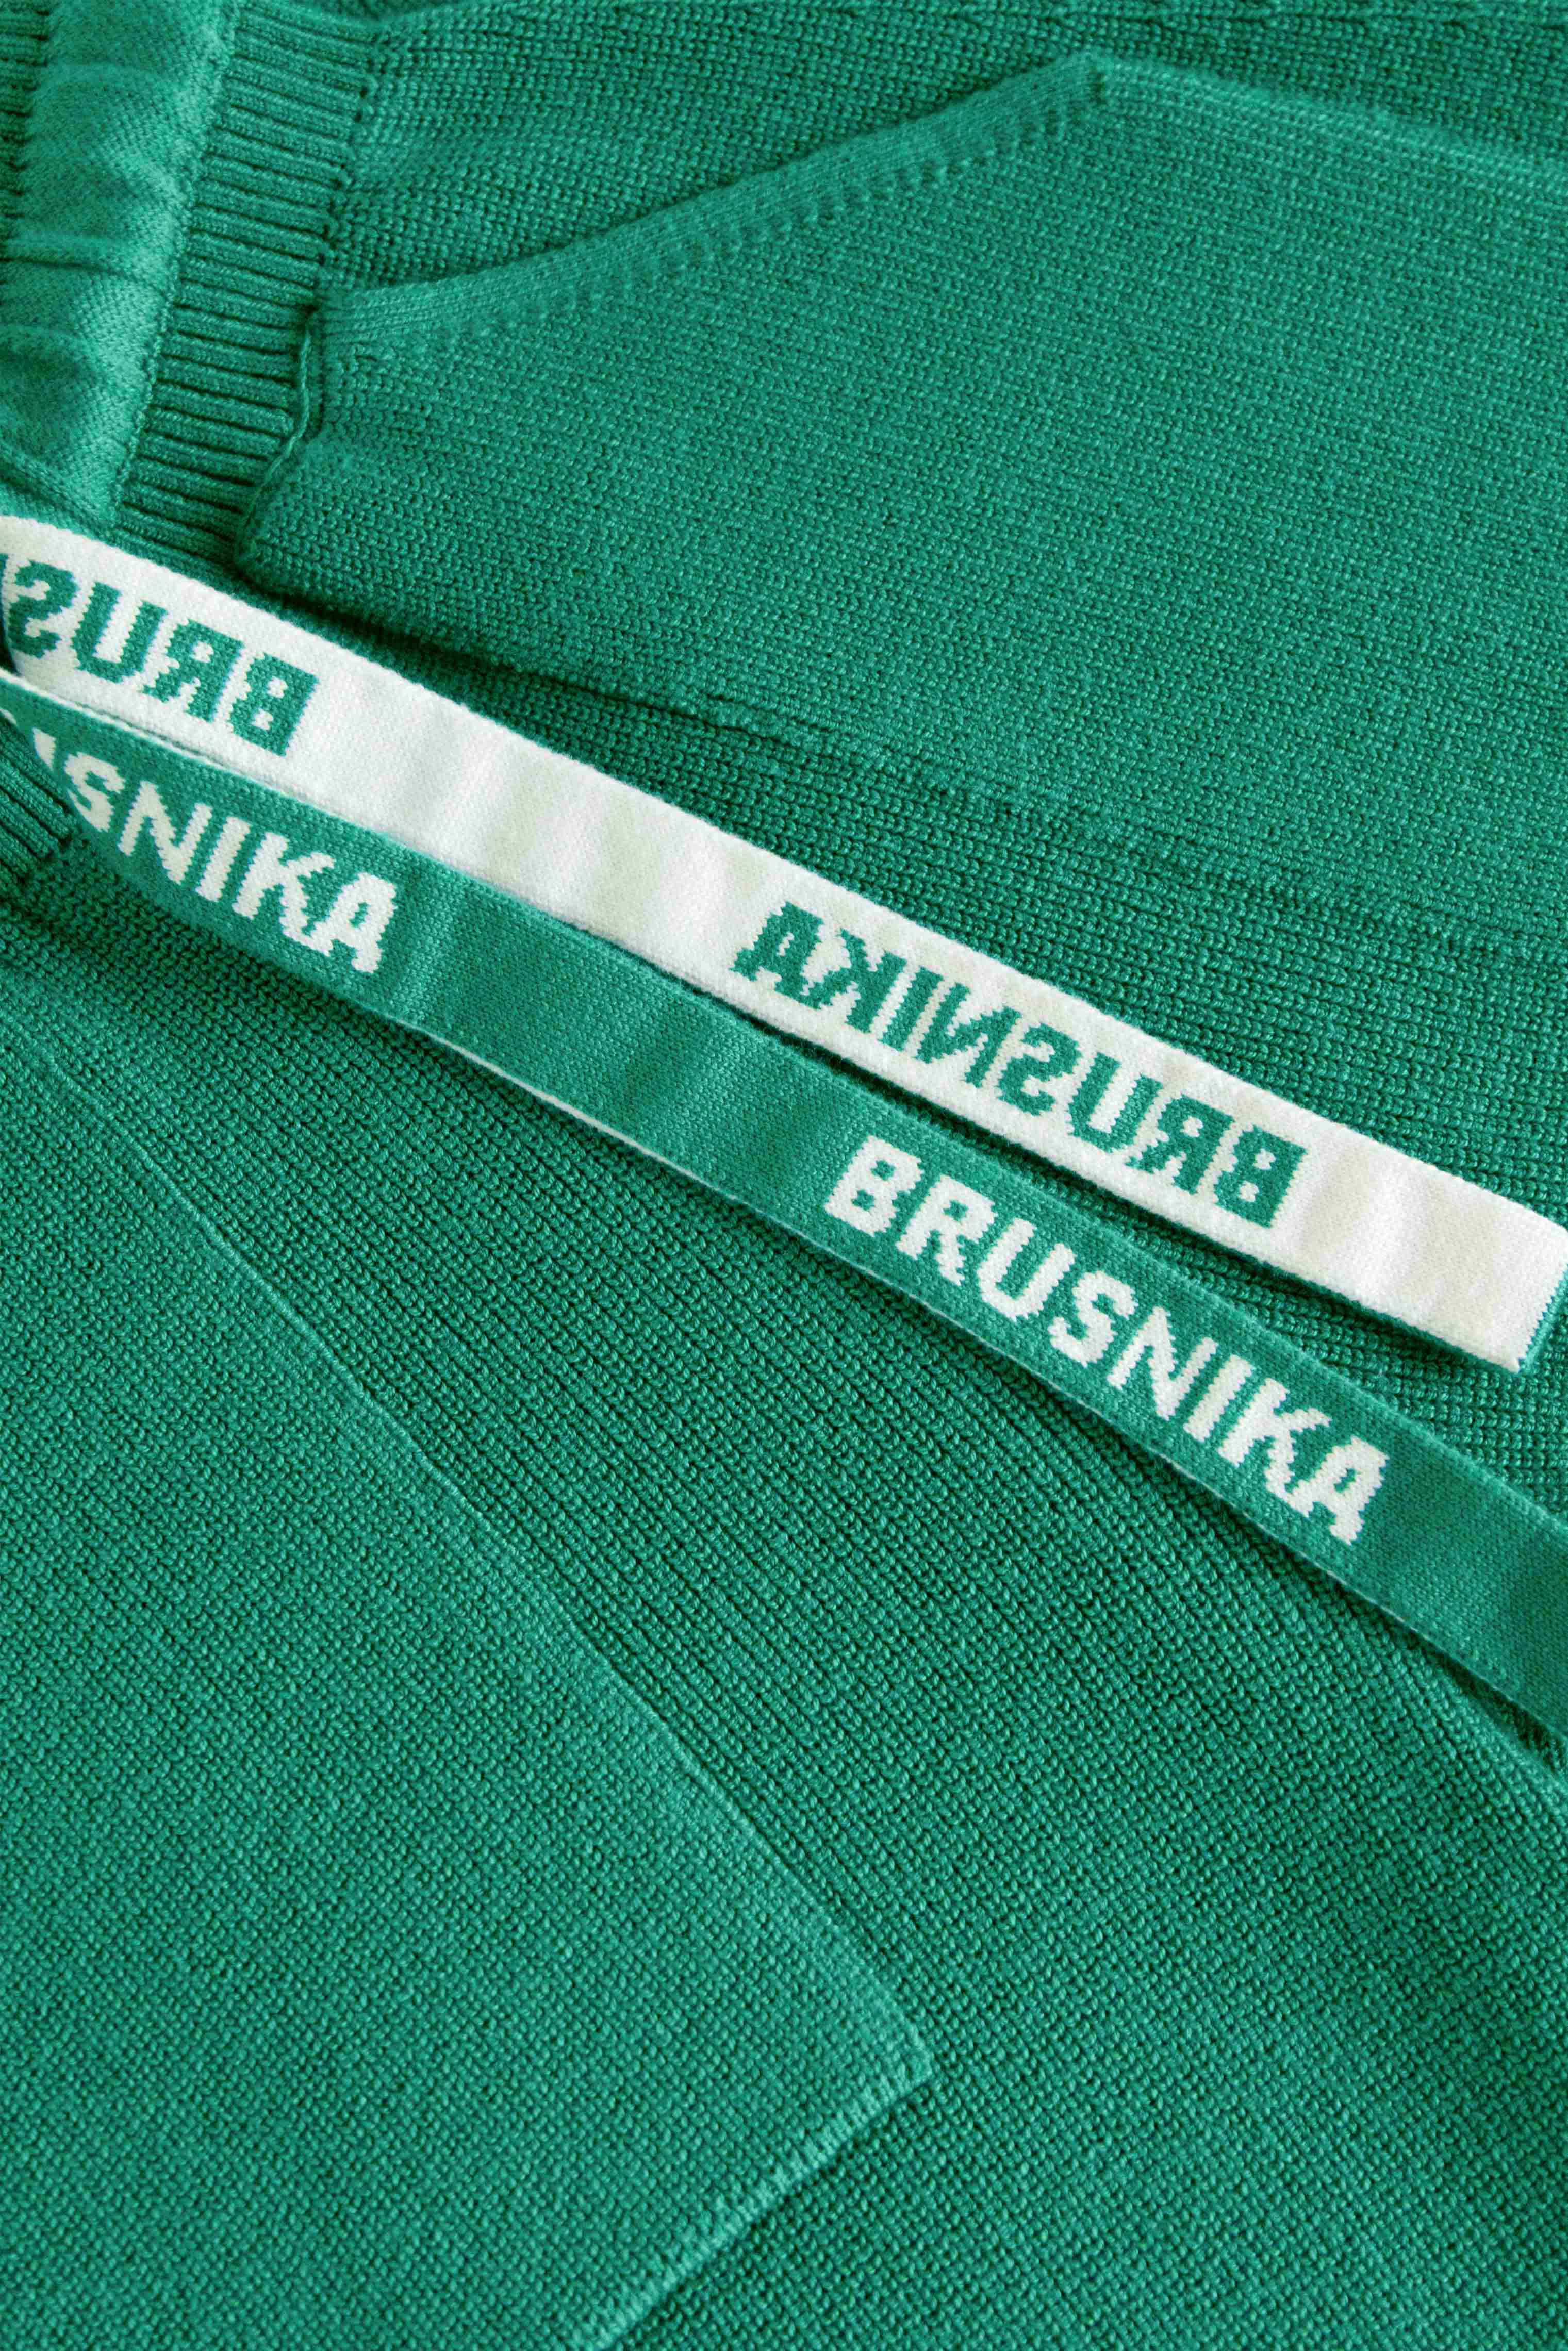 Trousers 3299-08 Green from BRUSNiKA